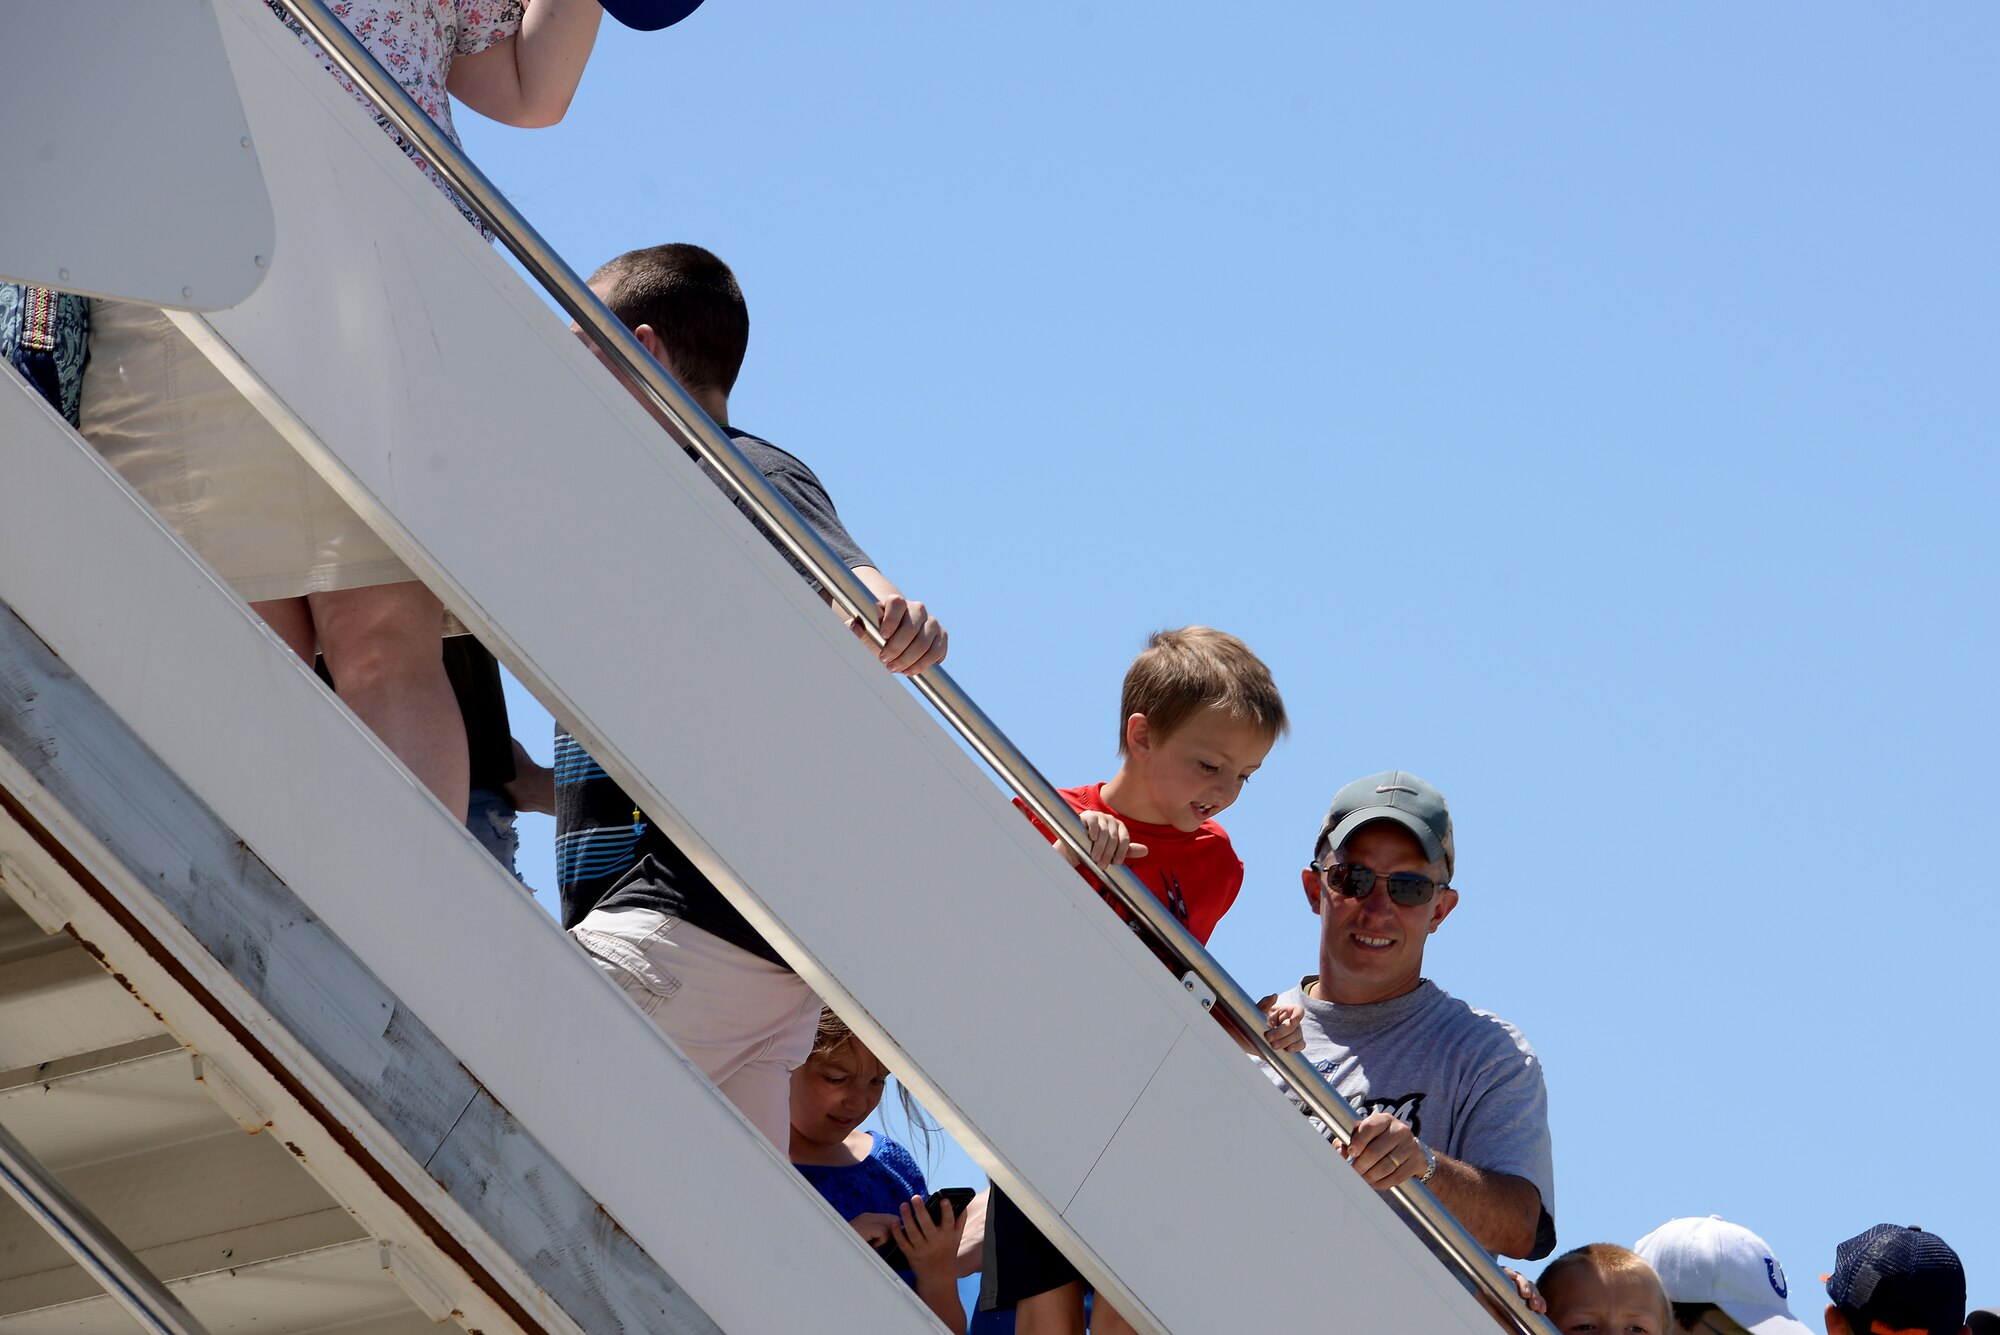 Numerous people enjoy the Scott Centennial Airshow at Scott Air Force Base, Ill., June 9, 2017. The base hosted the air show and open house to celebrate the 100th year of Scott AFB.  Over 50 aircraft, ranging from WWI’s Curtiss JN-4 Jenny to the currently utilized KC-135 Stratotanker, came to Scott, the fourth oldest Air Force base. Demonstrations included the Black Daggers, “Tora, Tora, Tora,” and the USAF Thunderbirds. Opened in 1917 and previously named Scott Field, the base has seen its mission evolve and expand to encompass a multitude of priorities, including aeromedical evacuation and communications.  Today, Scott is home to 31 mission partners and provides around-the-clock logistics support and rapid global mobility, carried out primarily by U.S. Transportation Command and Air Mobility Command. (U.S. Air Force photo by Tech. Sgt. Jonathan Fowler)